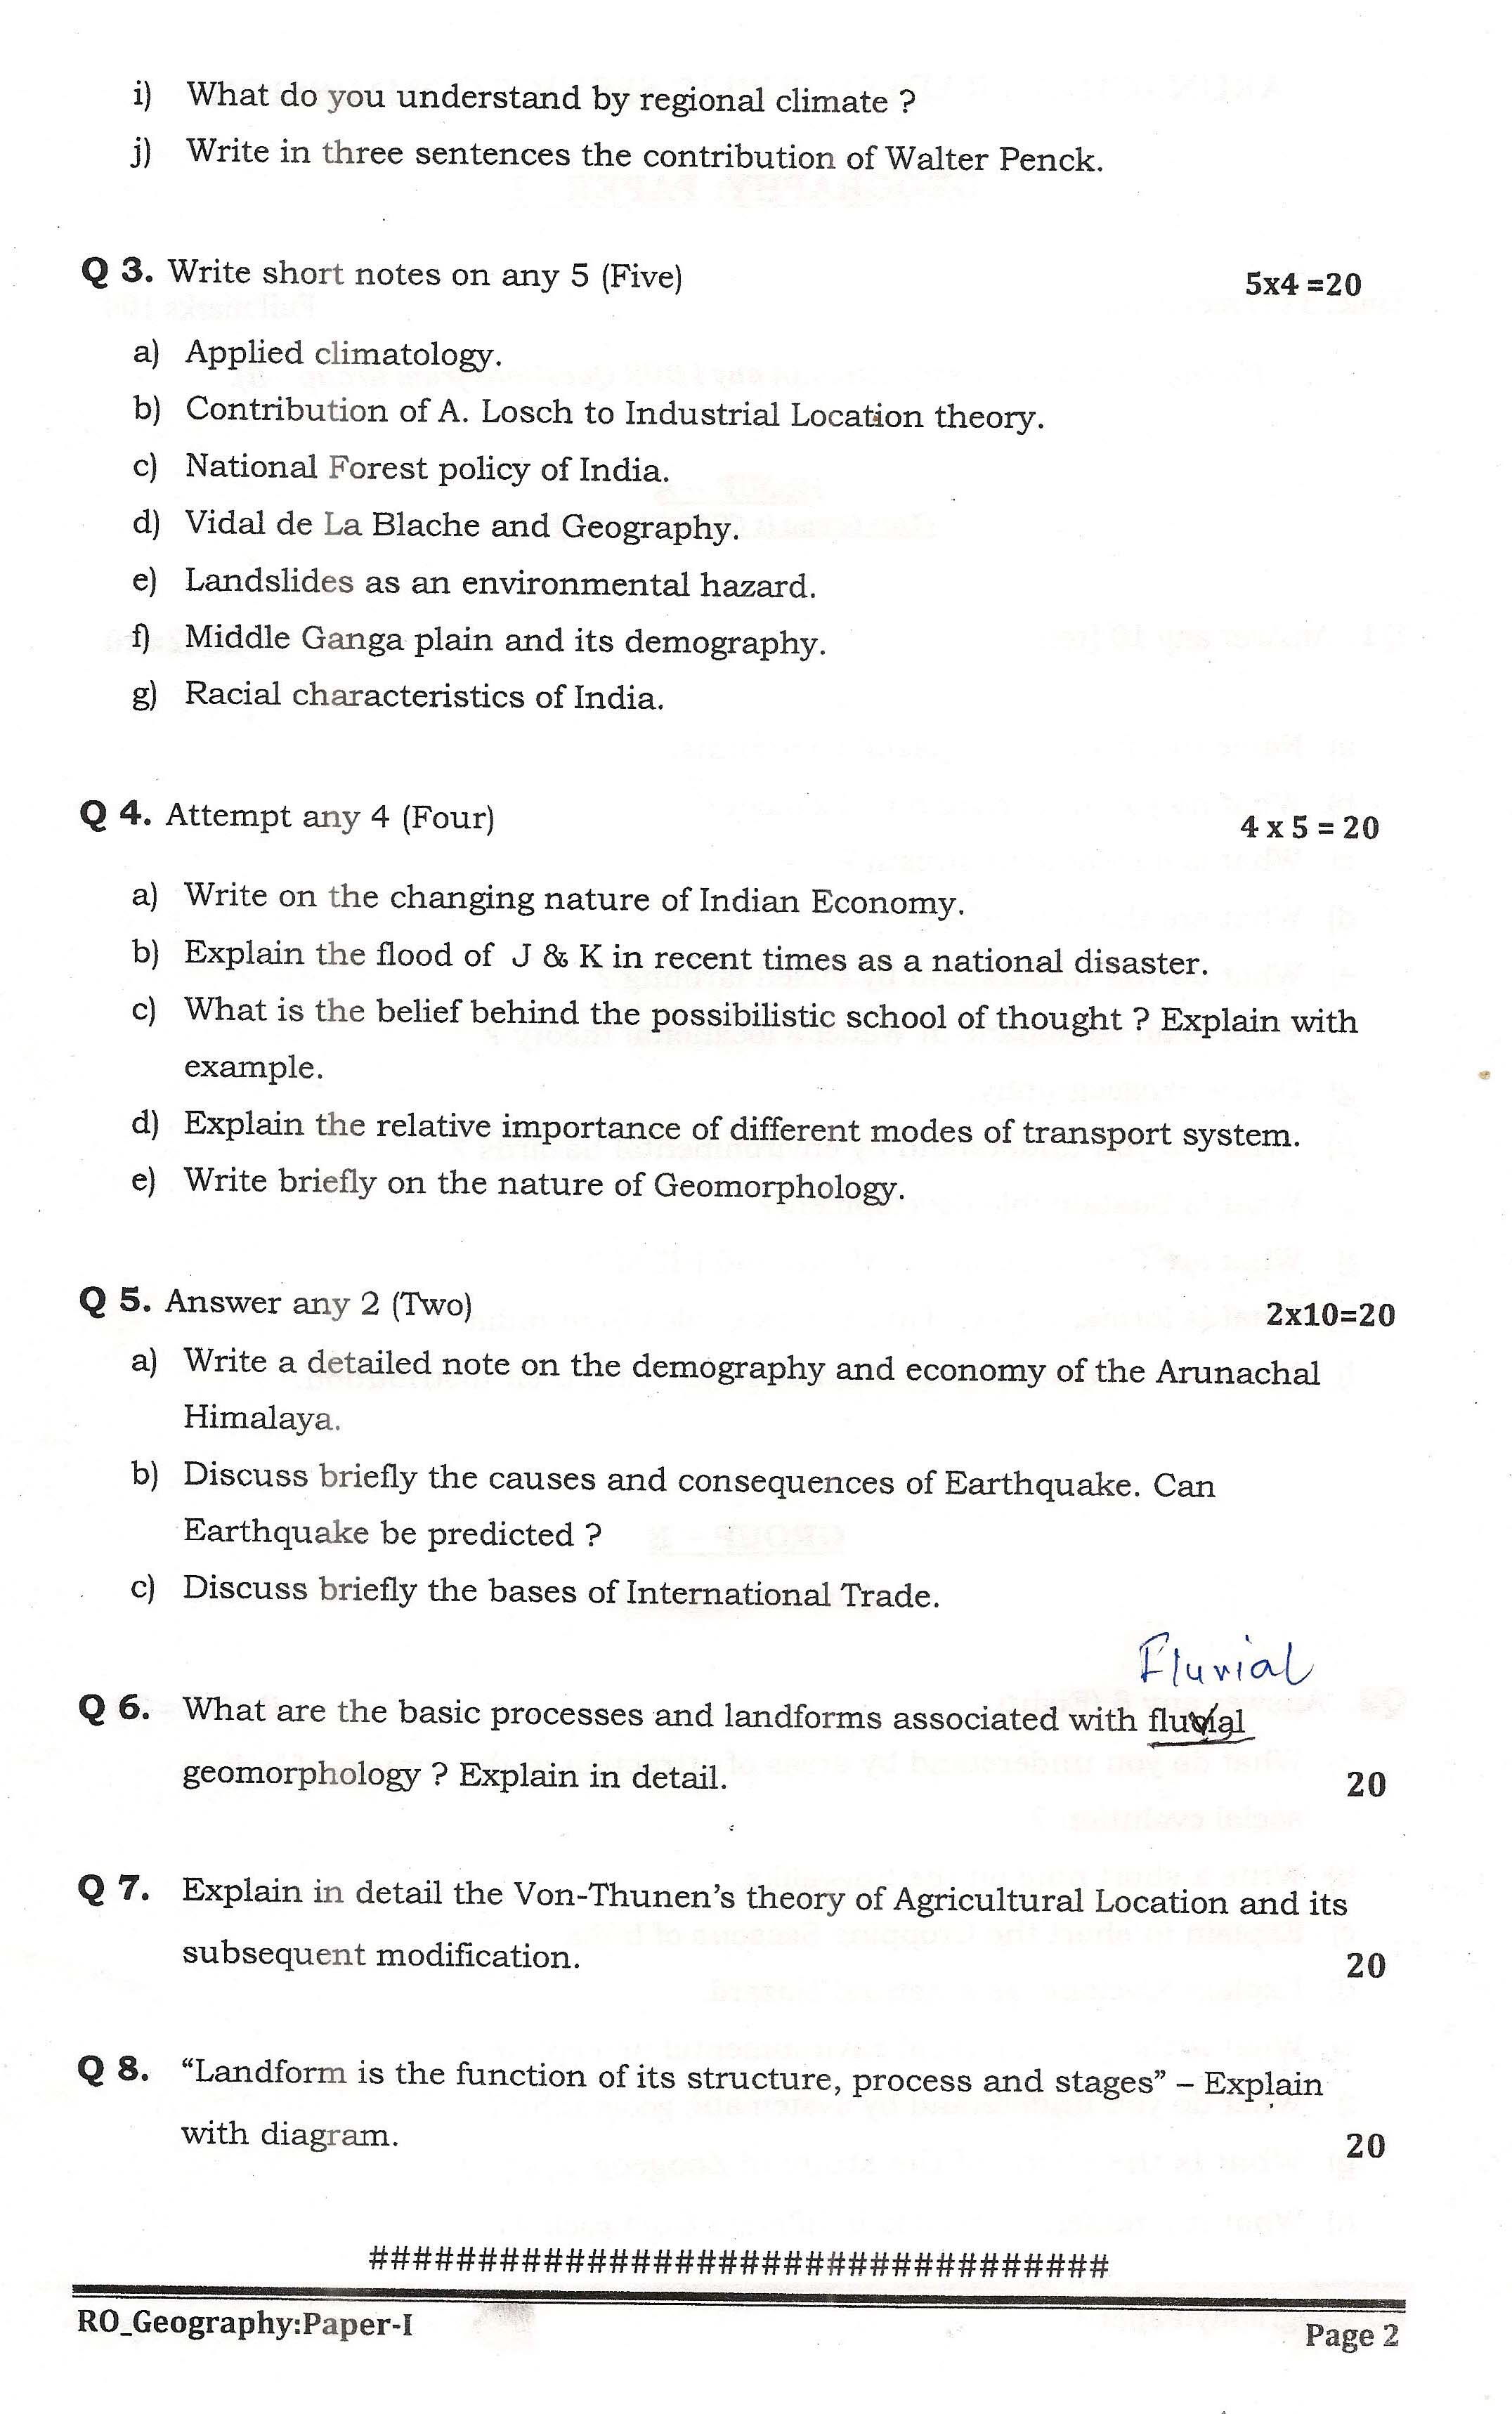 APPSC Research Officer Geography Paper I Exam Question Paper 2014 2